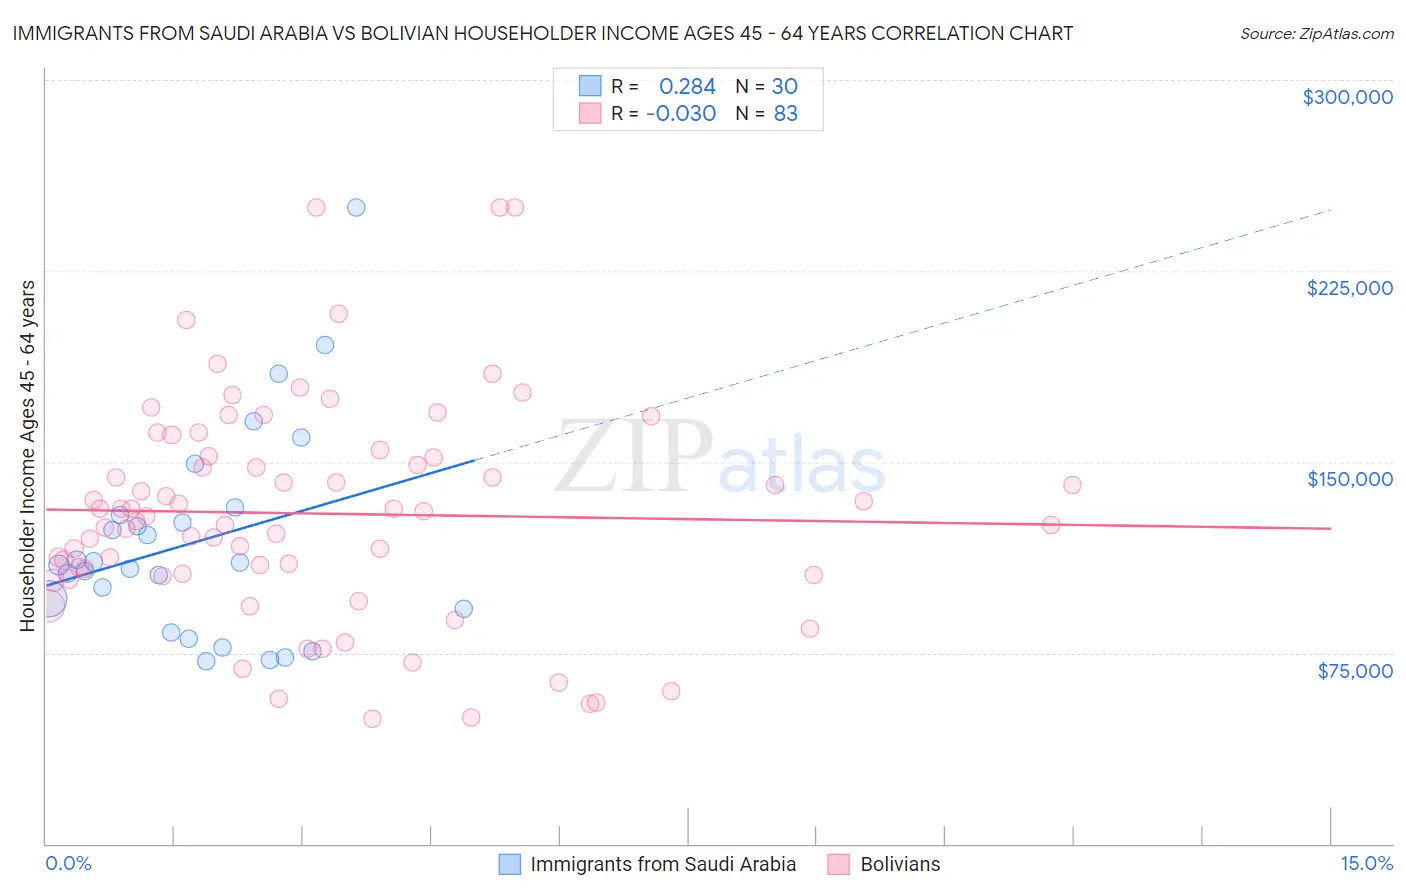 Immigrants from Saudi Arabia vs Bolivian Householder Income Ages 45 - 64 years